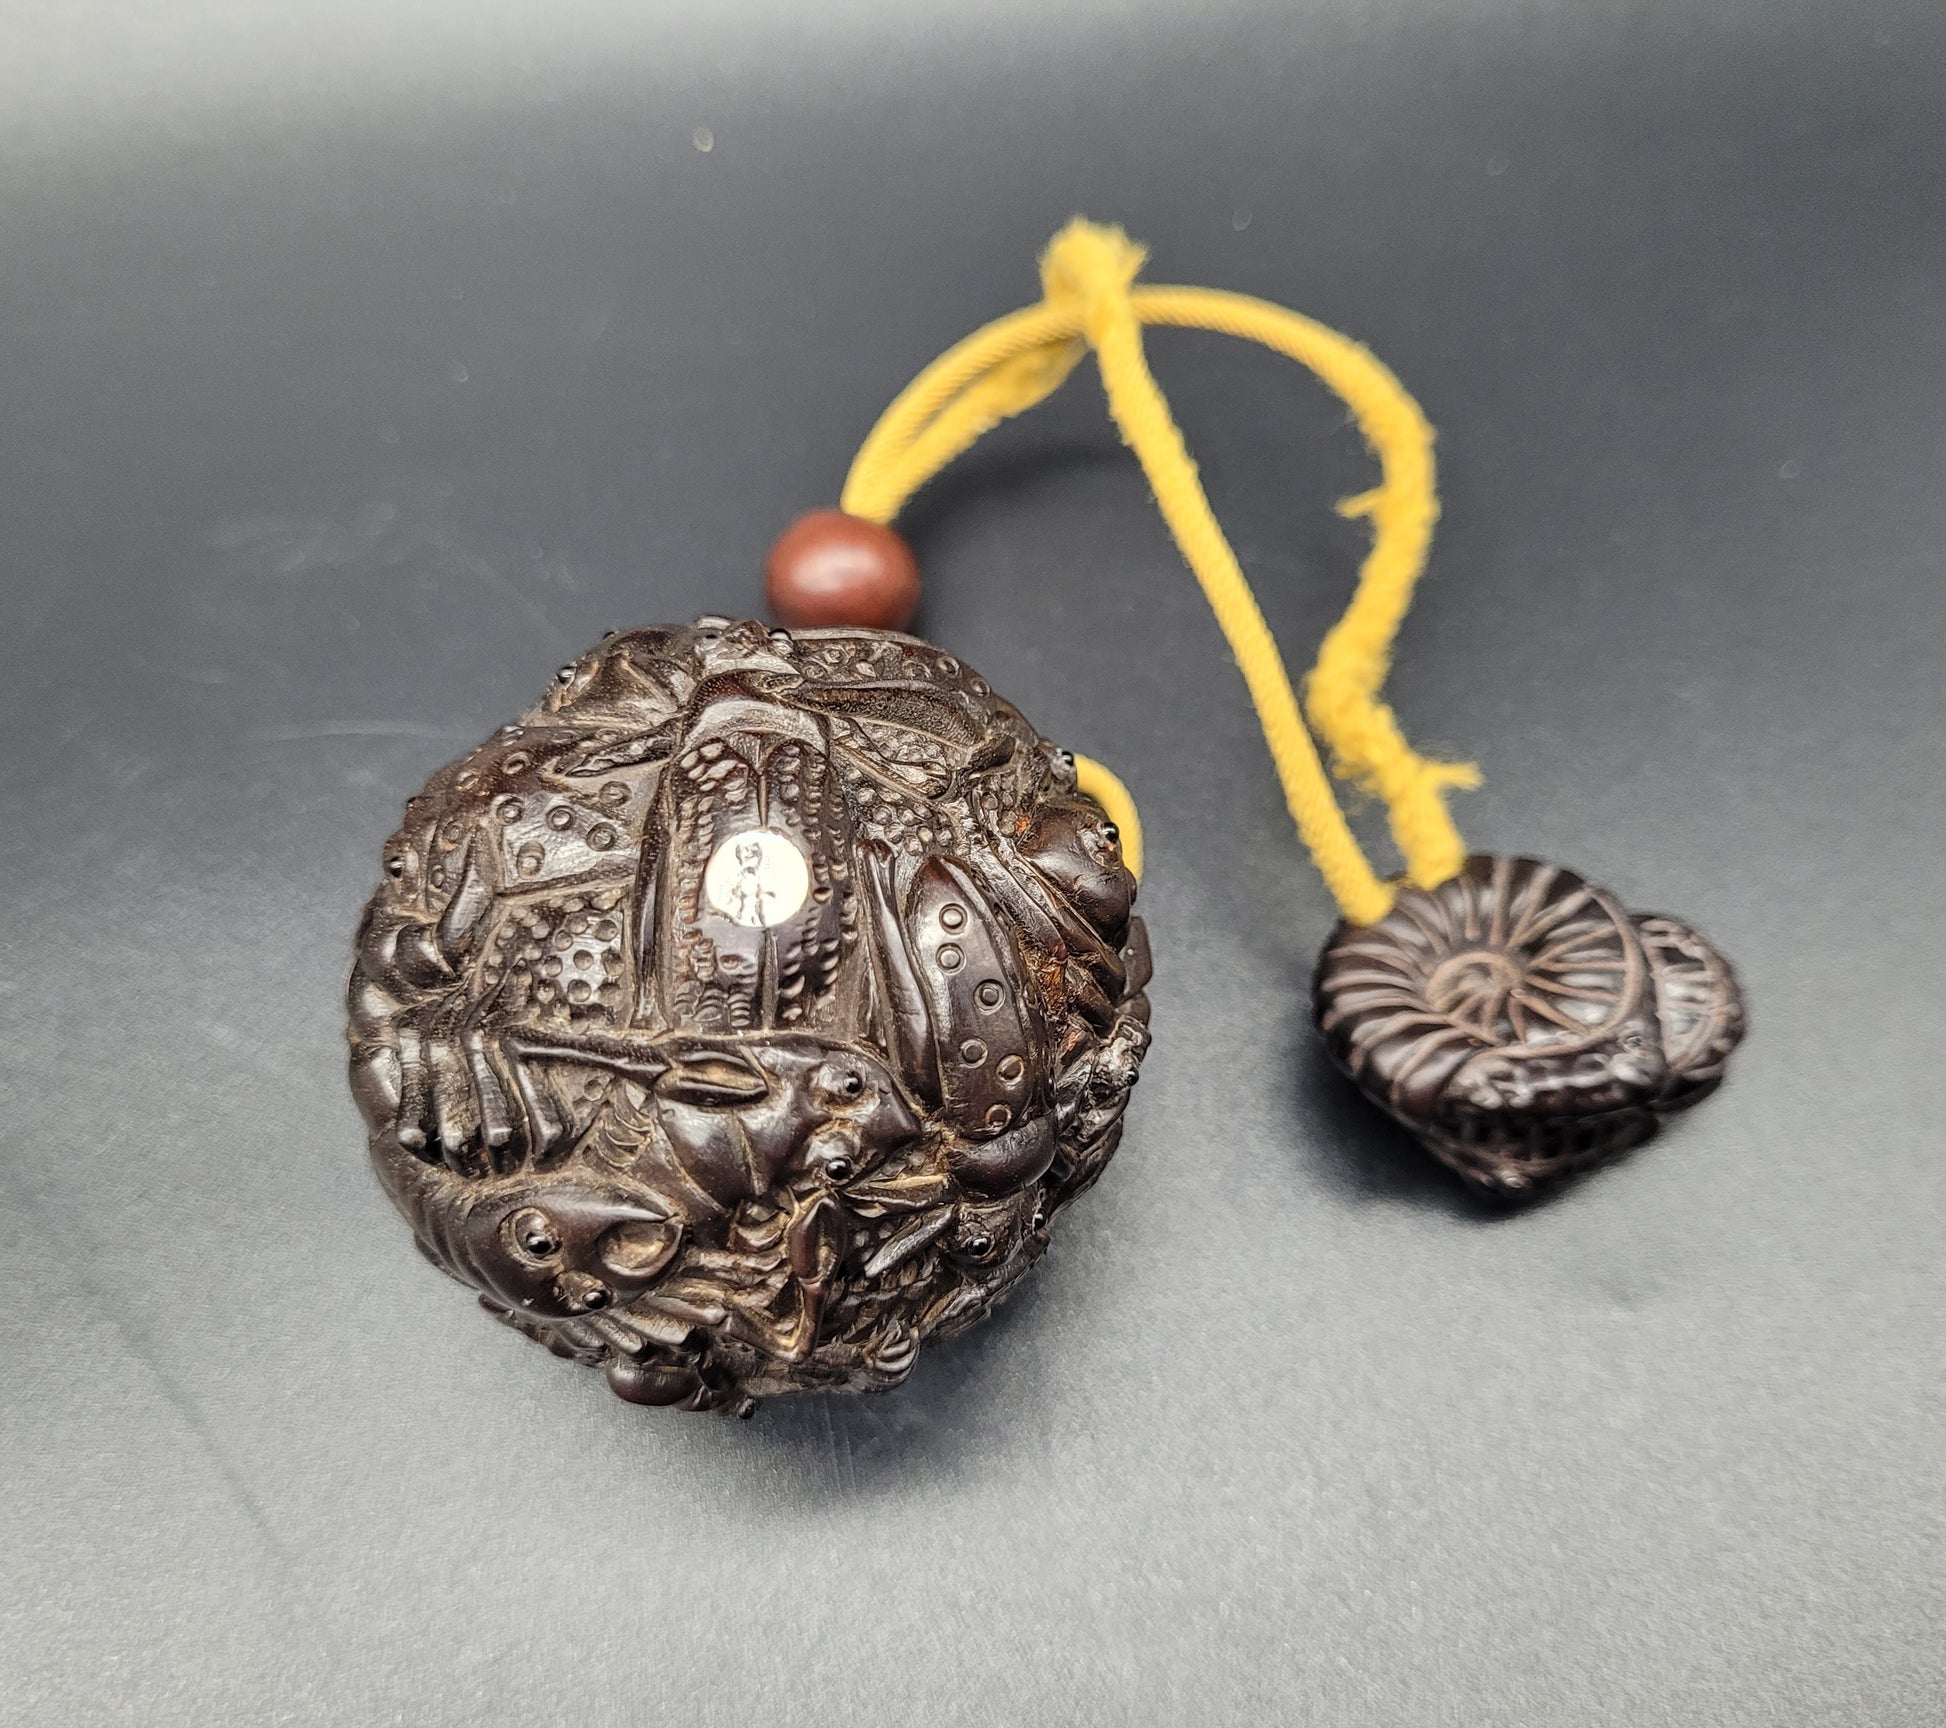 Asian Art For Sale Online Japanese Meiji Carved Inro & Netsuke Signed By The Artist